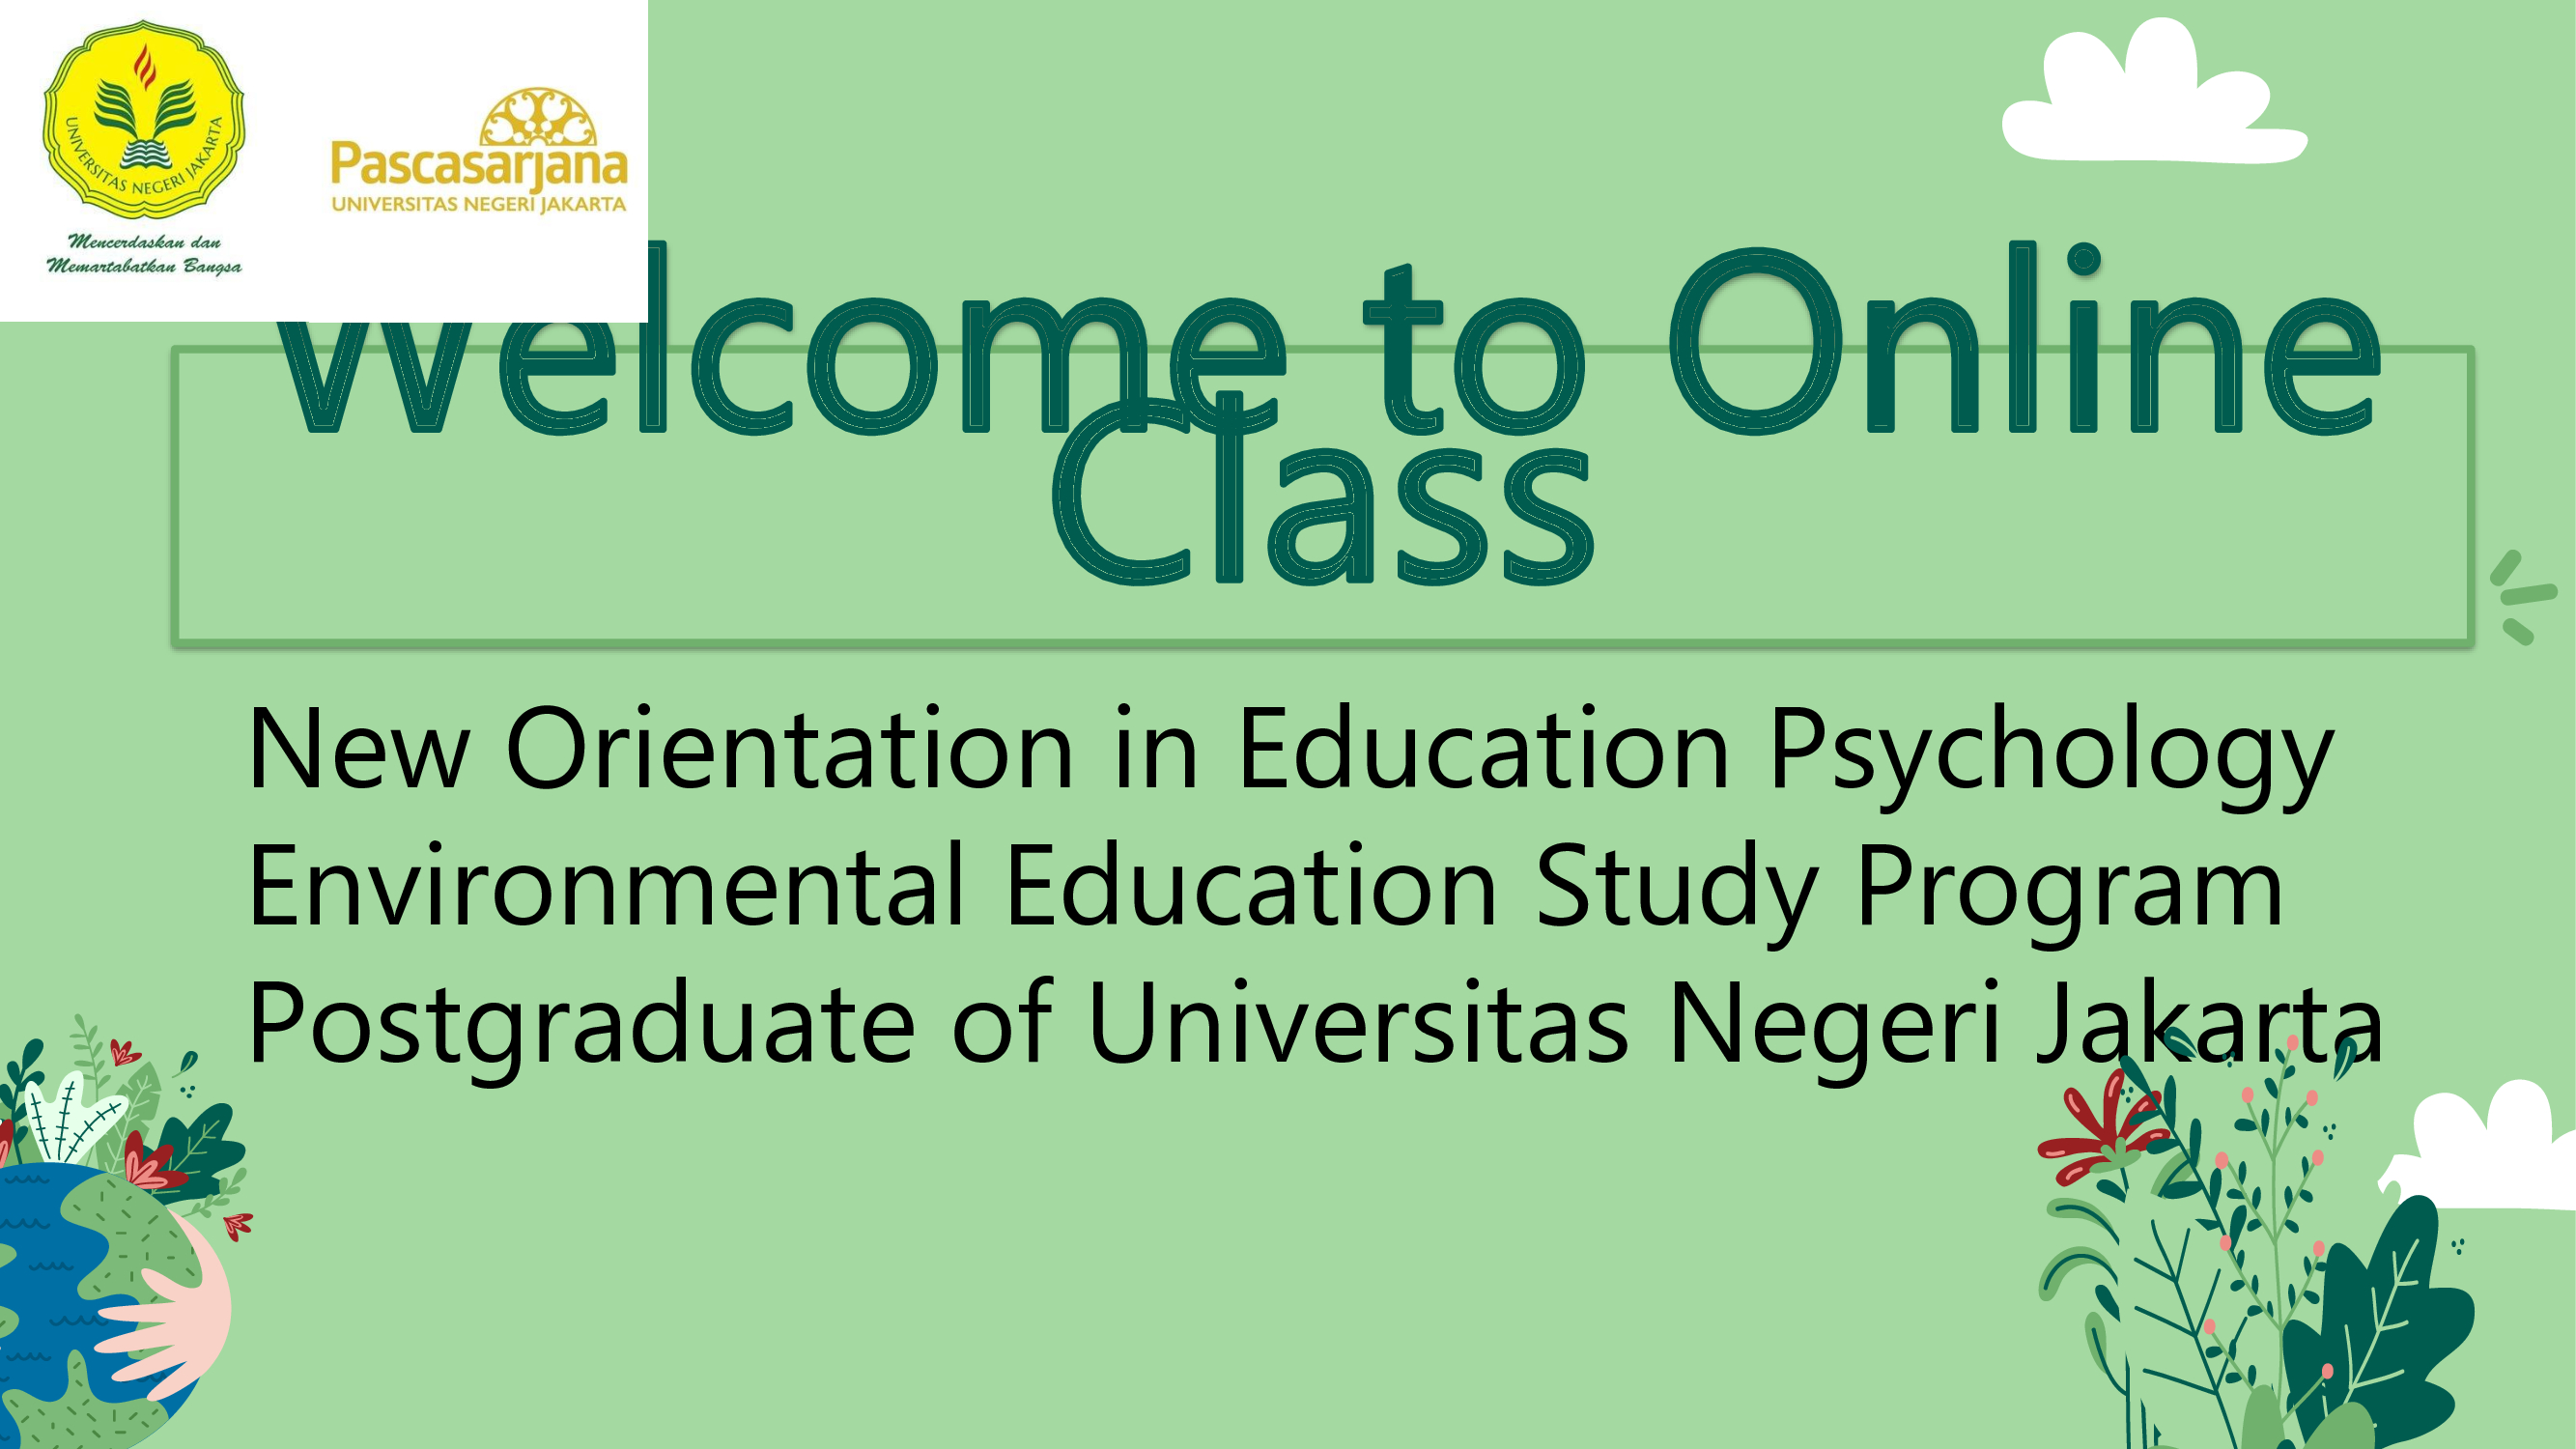 New Orientation in Education Psychology